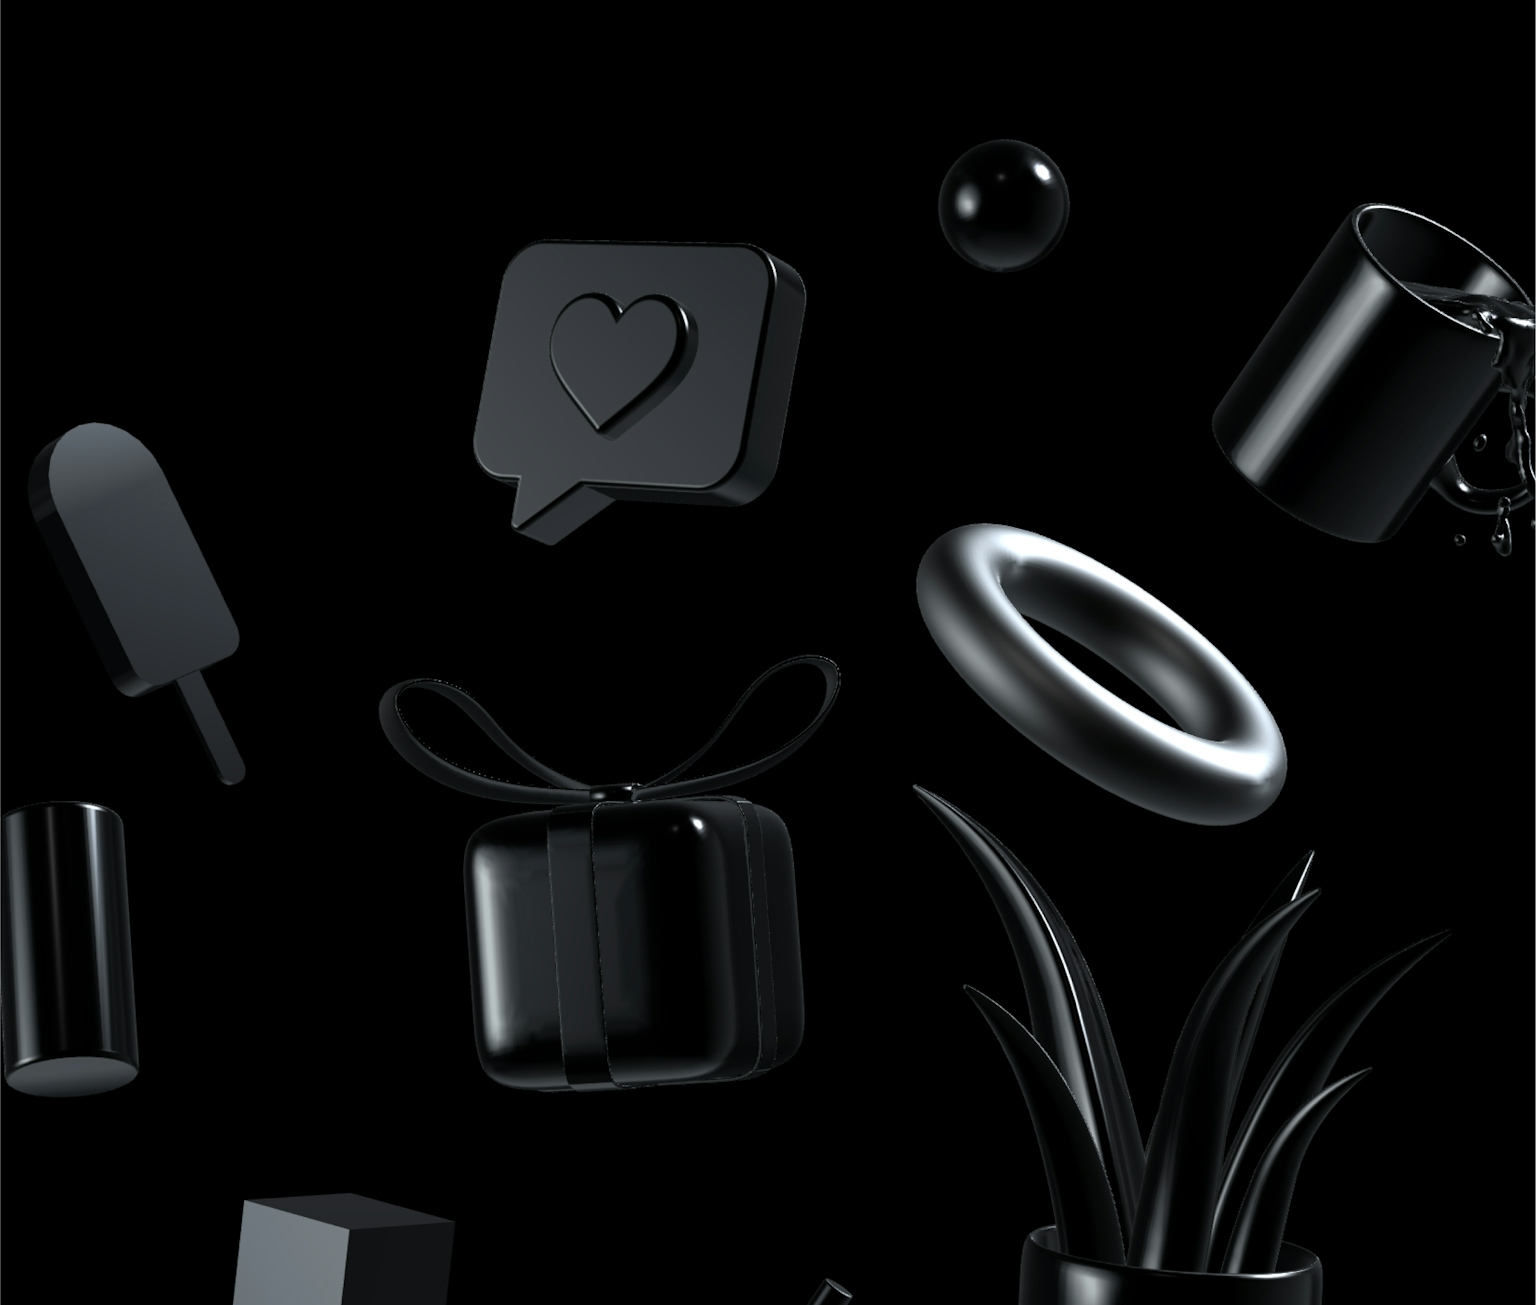 Black 3D illustrations and icons